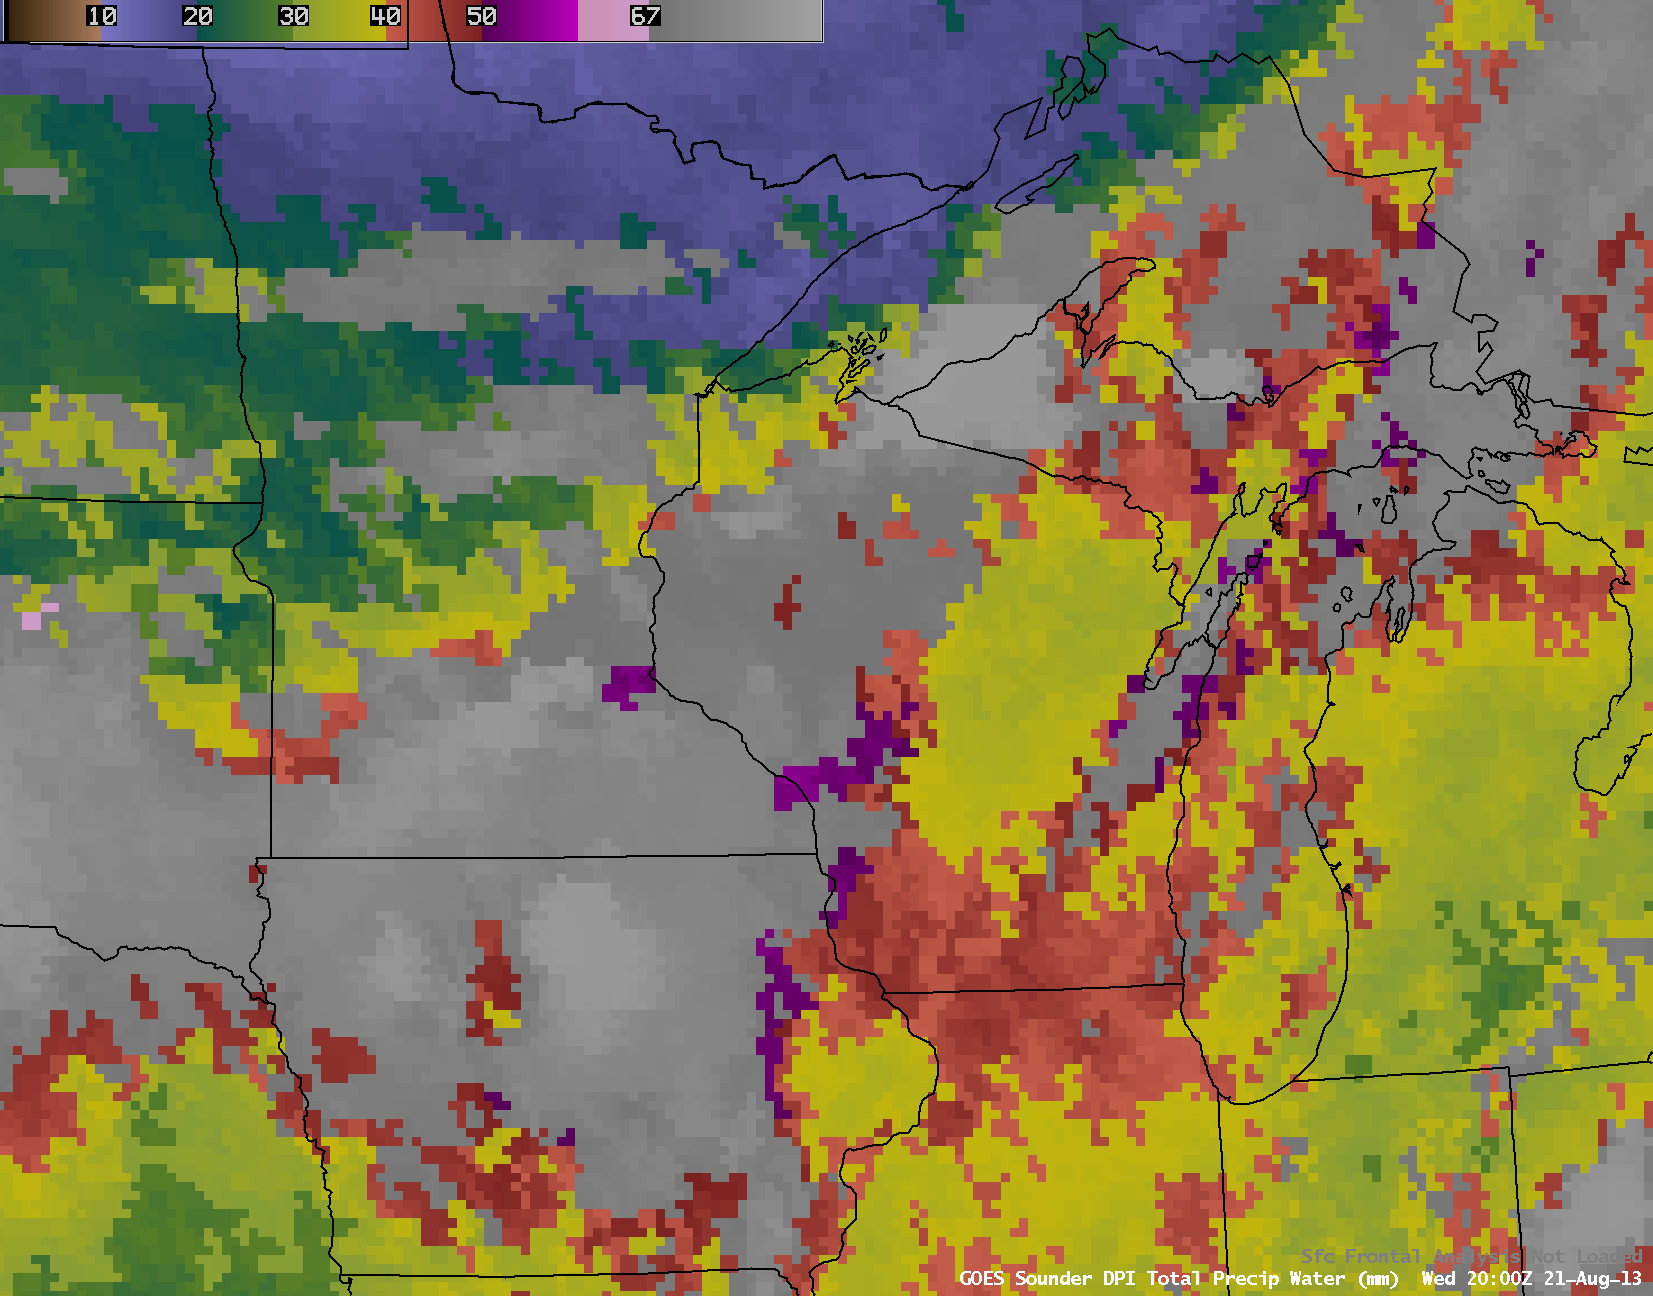 GOES-13 Sounder DPI values of Total Precipitable Water